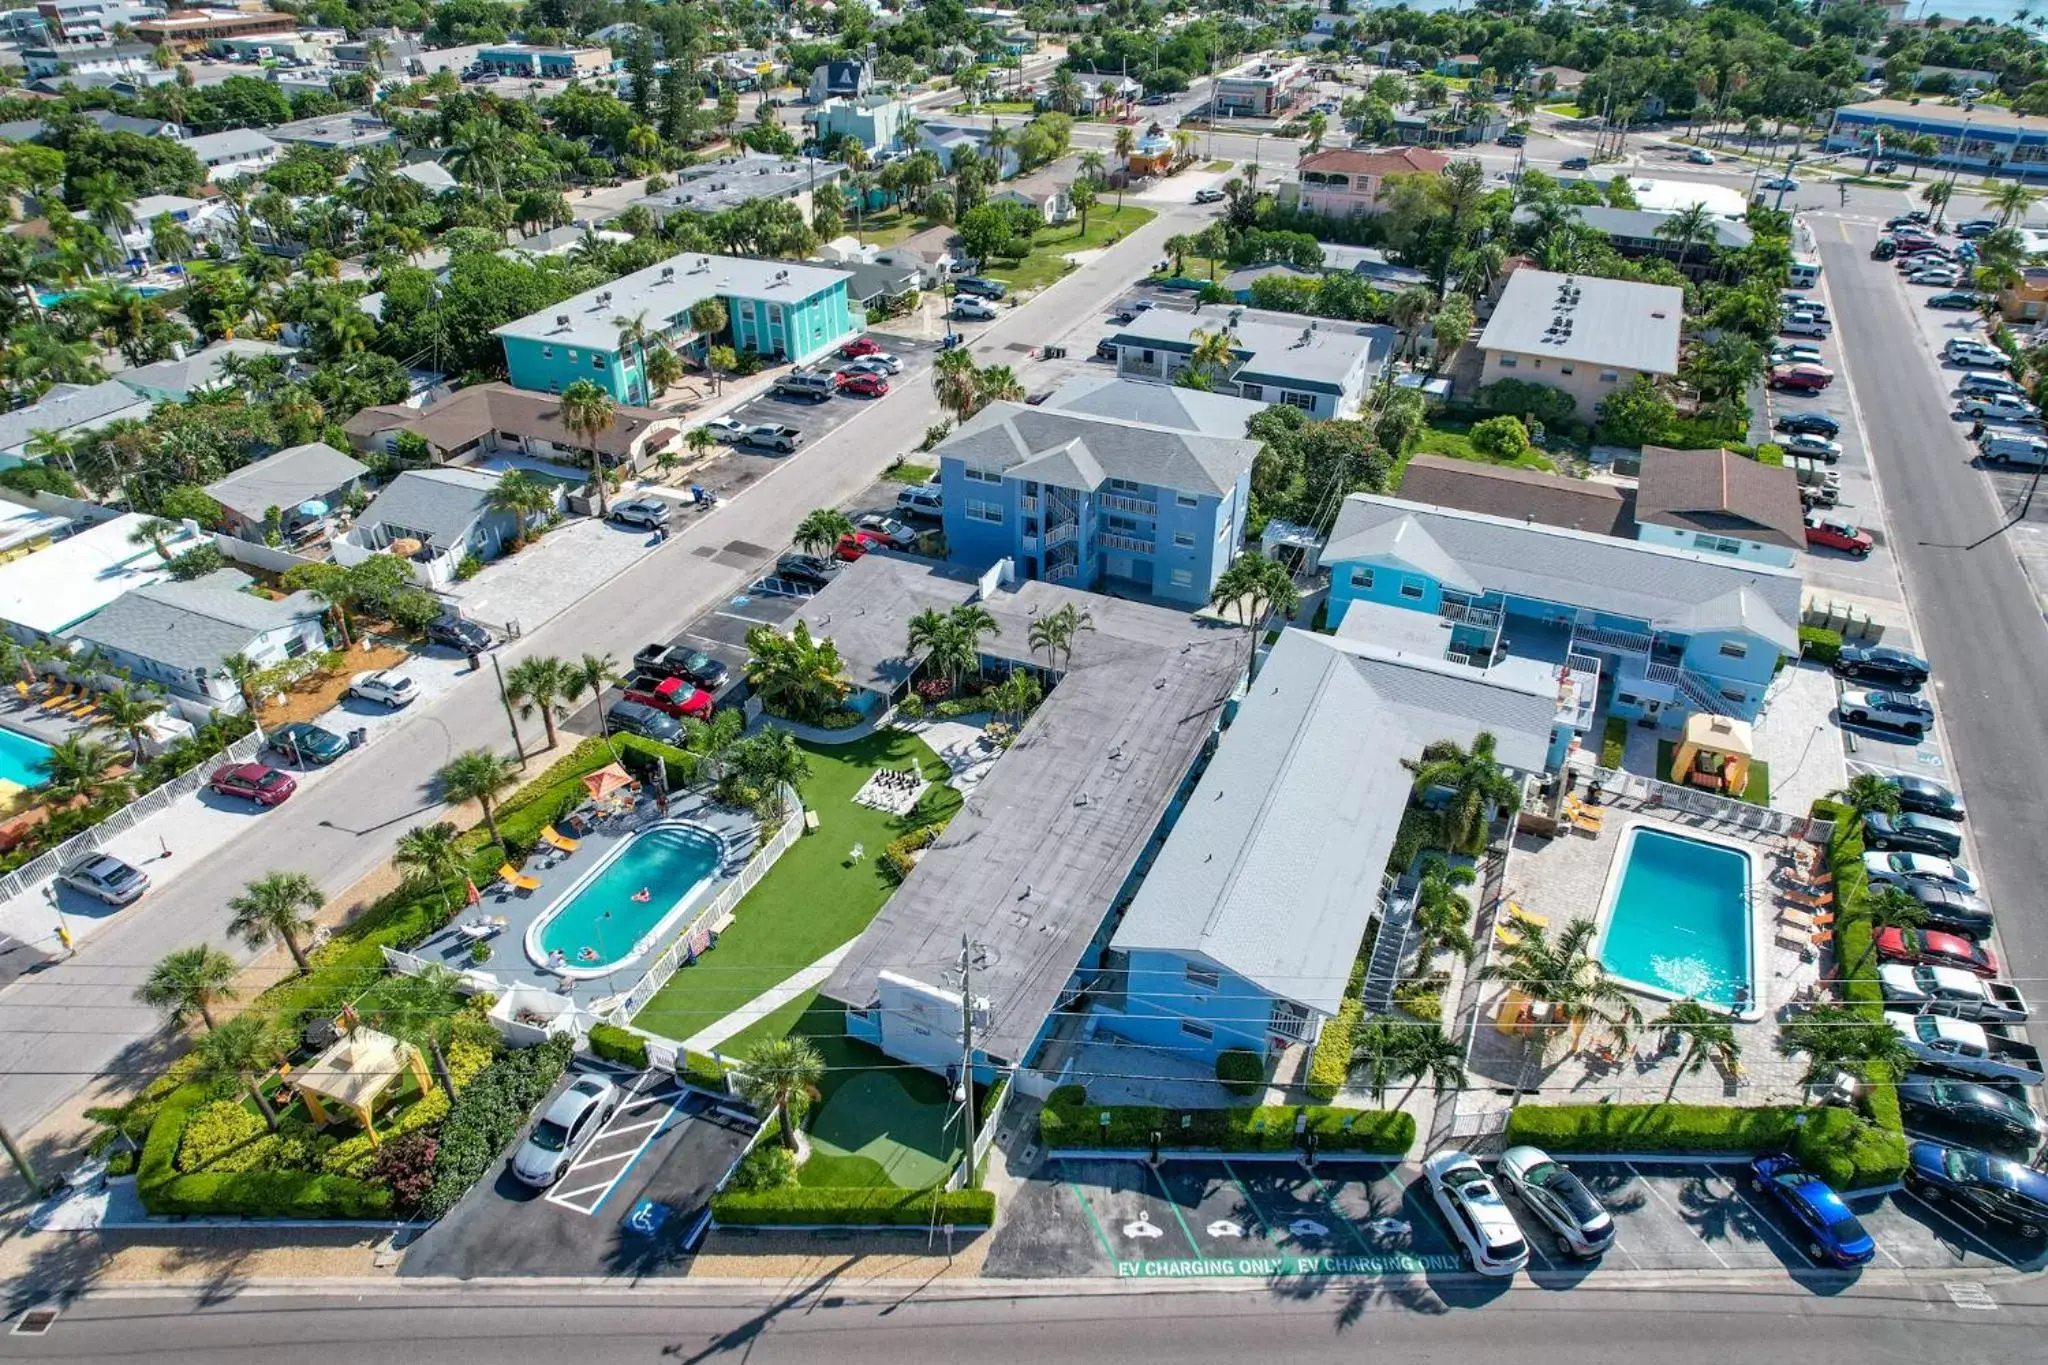 Property building, Bird's-eye View in St. Pete Beach Suites